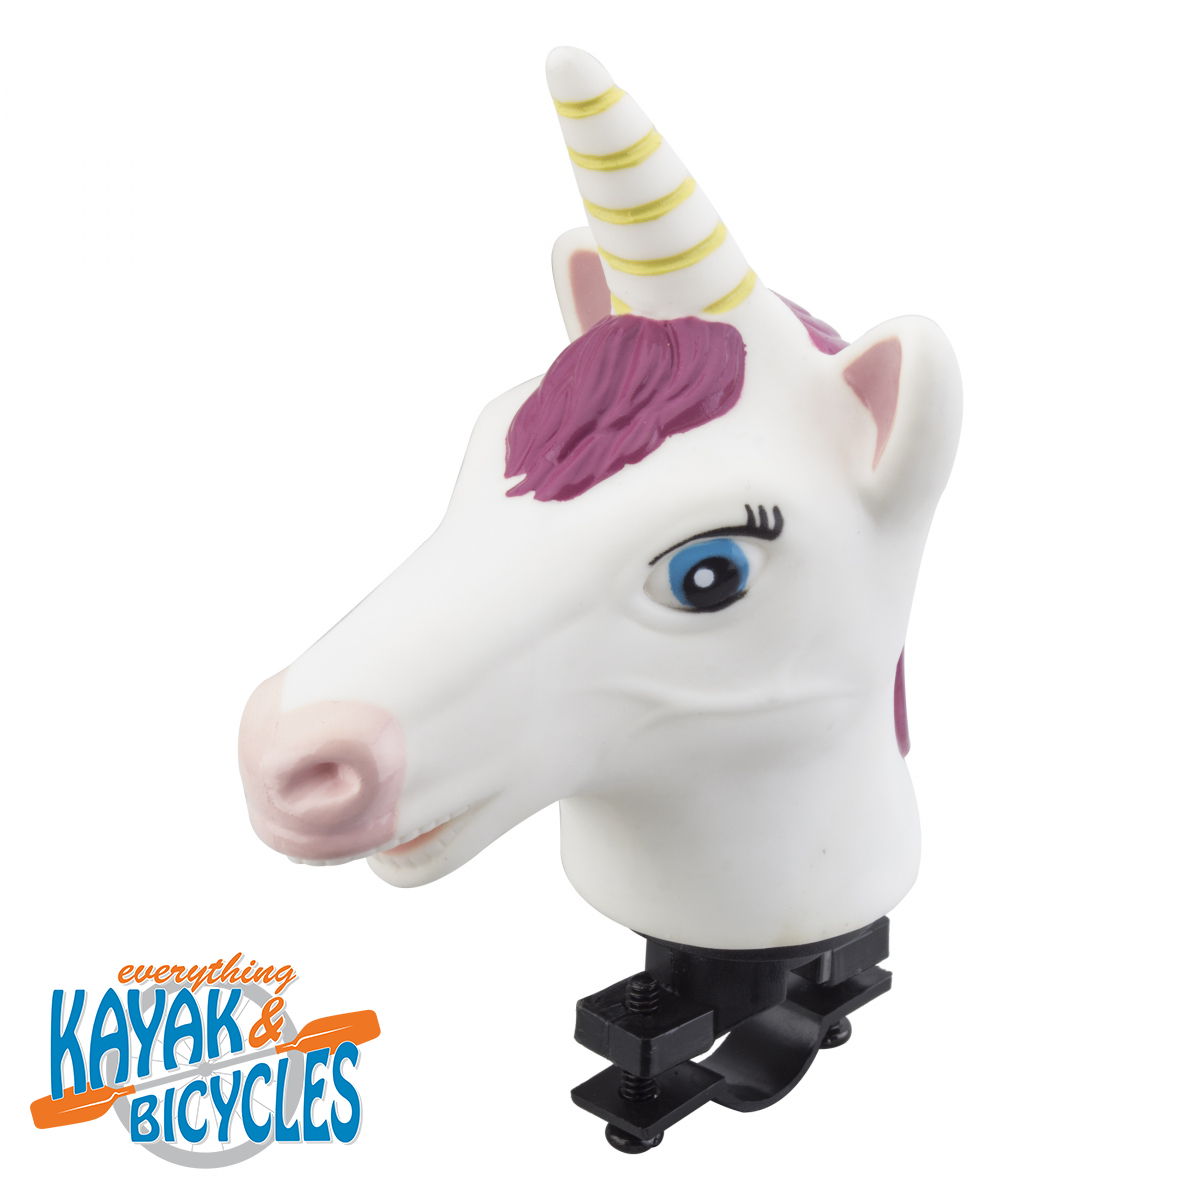 Unicorn Bike Horn 
Novelty horns that are great for kids and adults alike
Perfect for novice riders as well as serious riders who like a little flair, personality, or humor for their group rides
Fits most handlebars